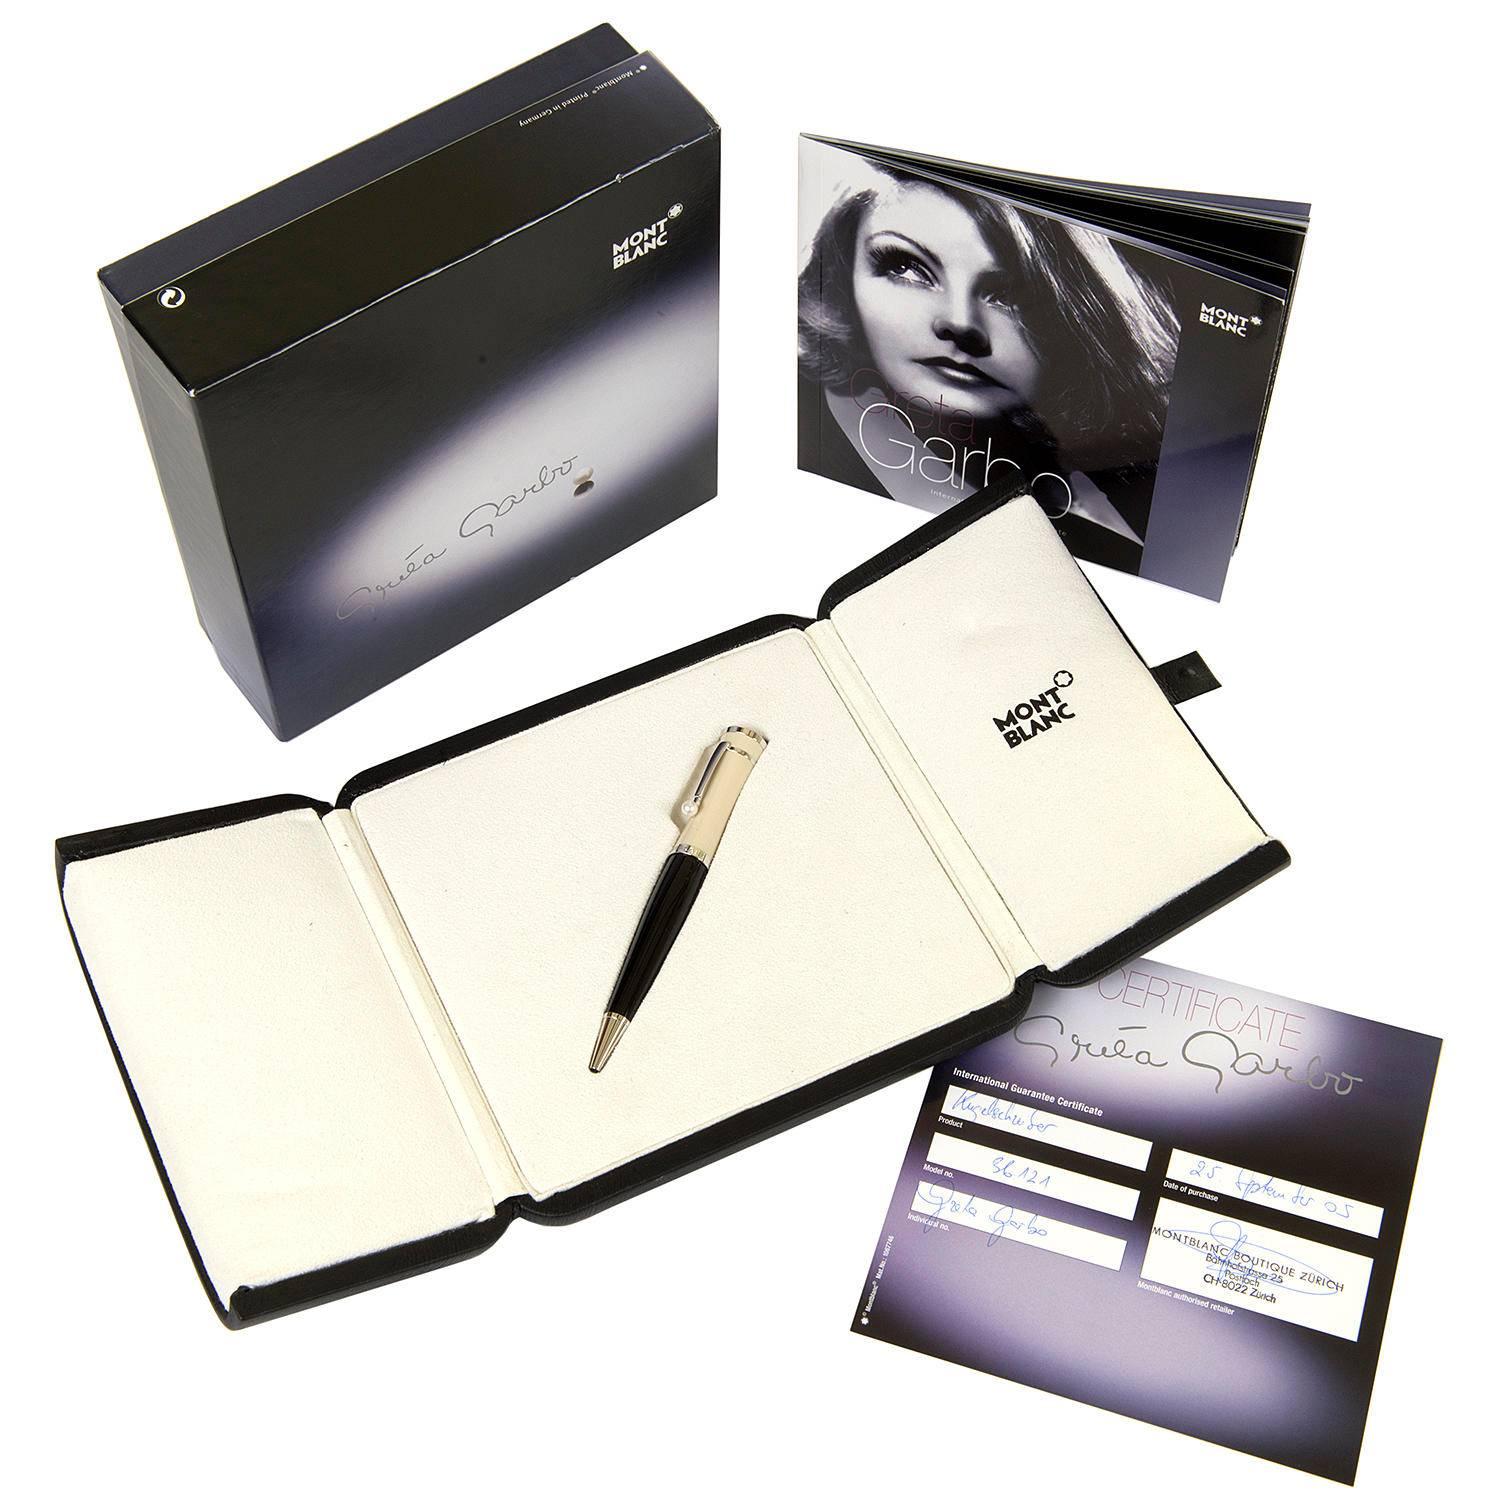 Beige A SPECIAL GIFT BOX - LIMITED EDITION Greta Garbo pen Pearl Inset, by Mont Blanc